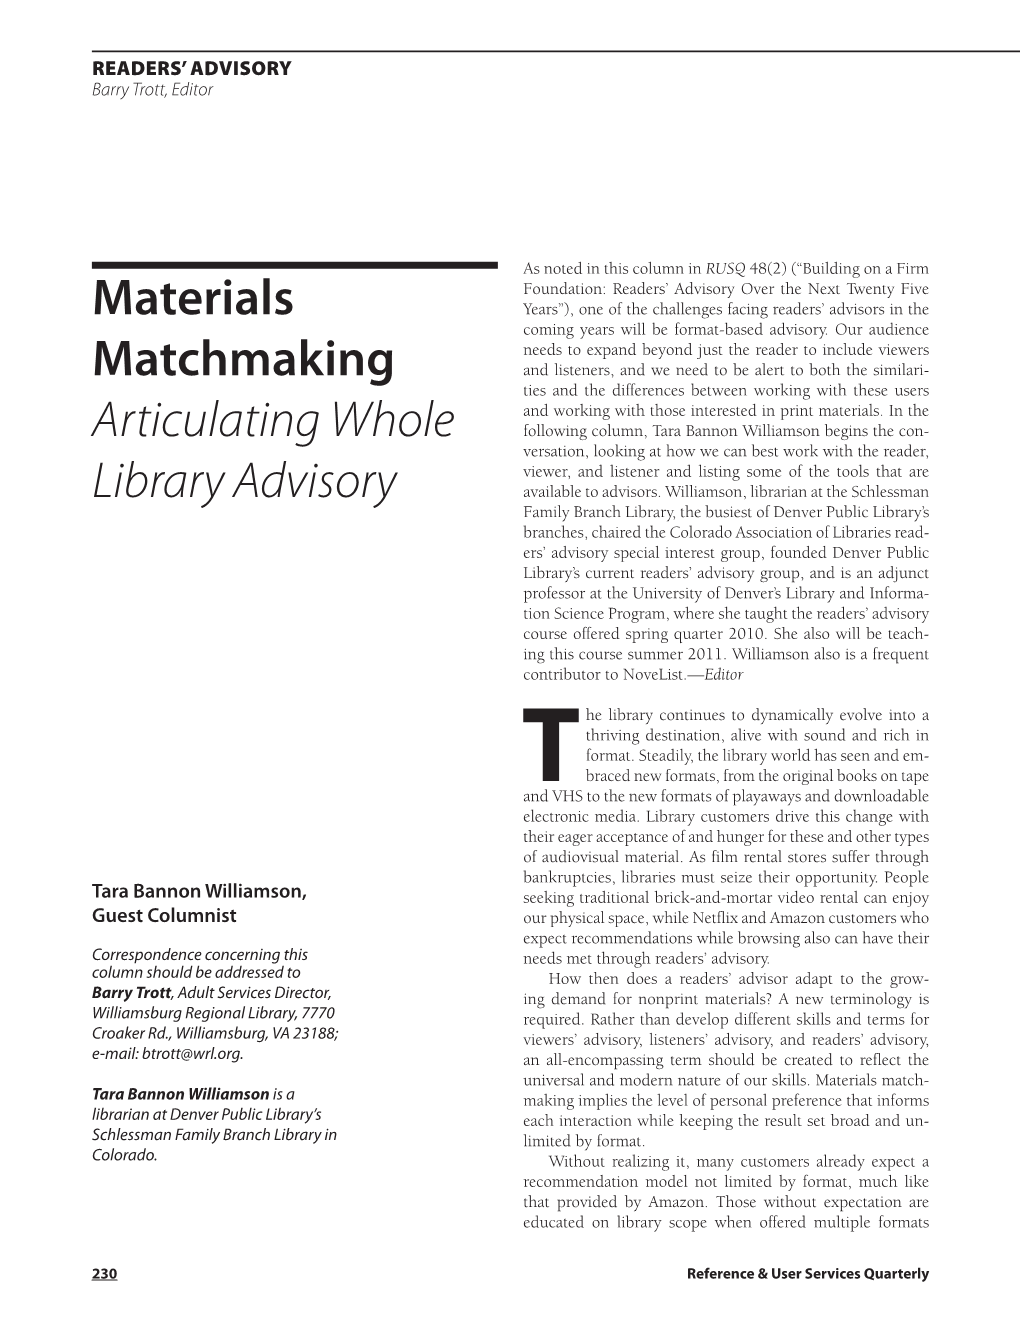 Materials Matchmaking Articulating Whole Library Advisory